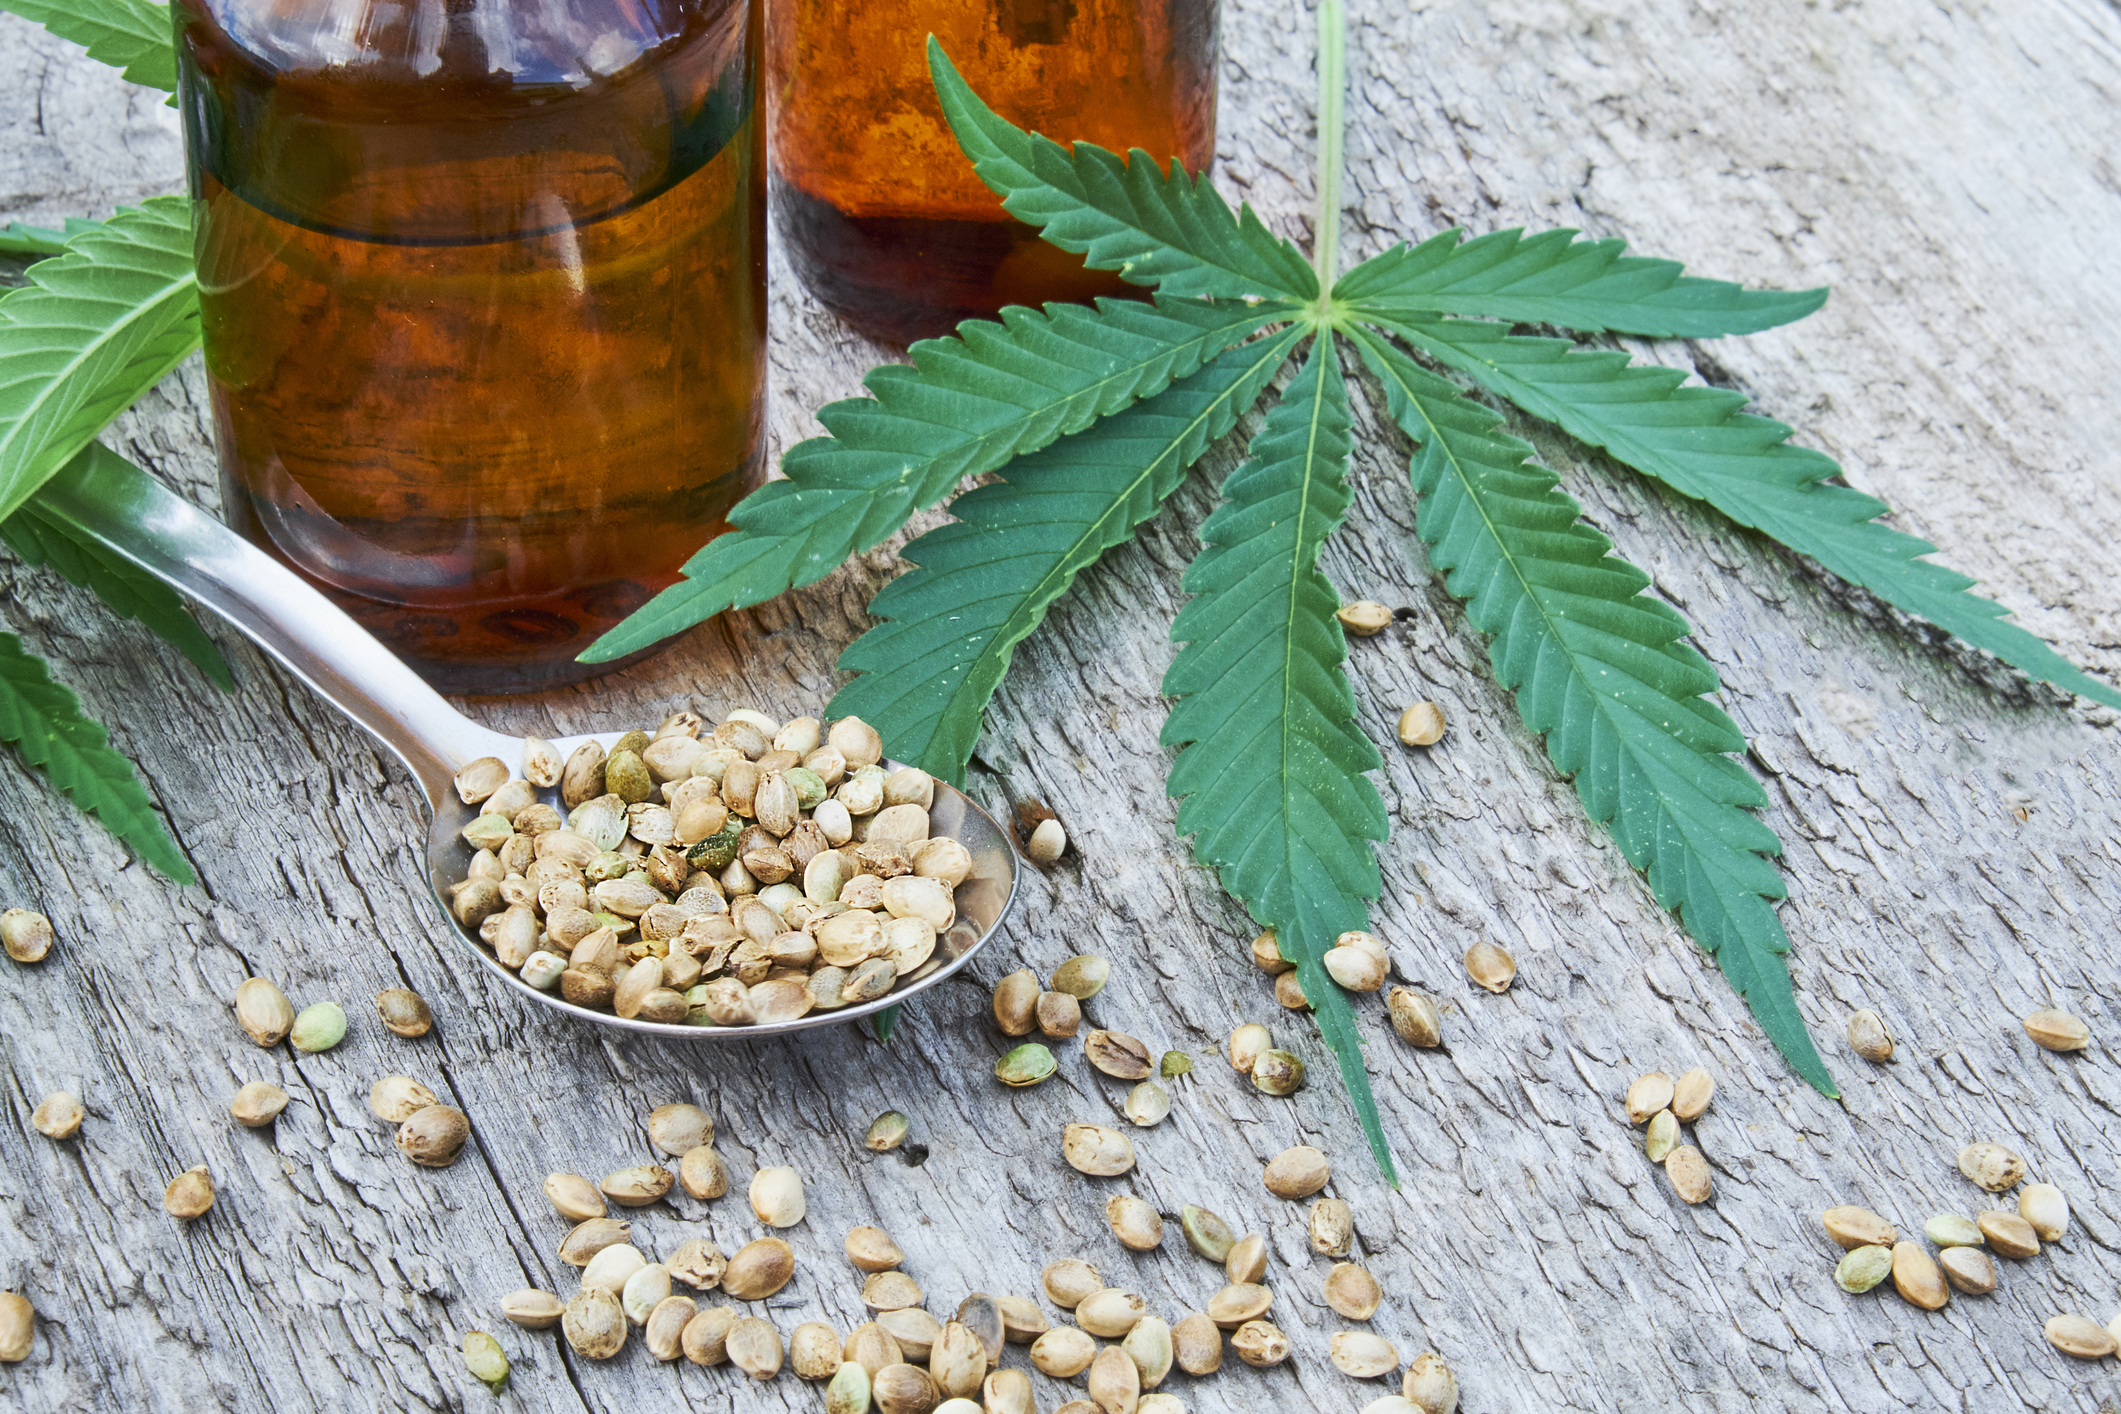 How is the THC-Free CBD therapy beneficial for patients?